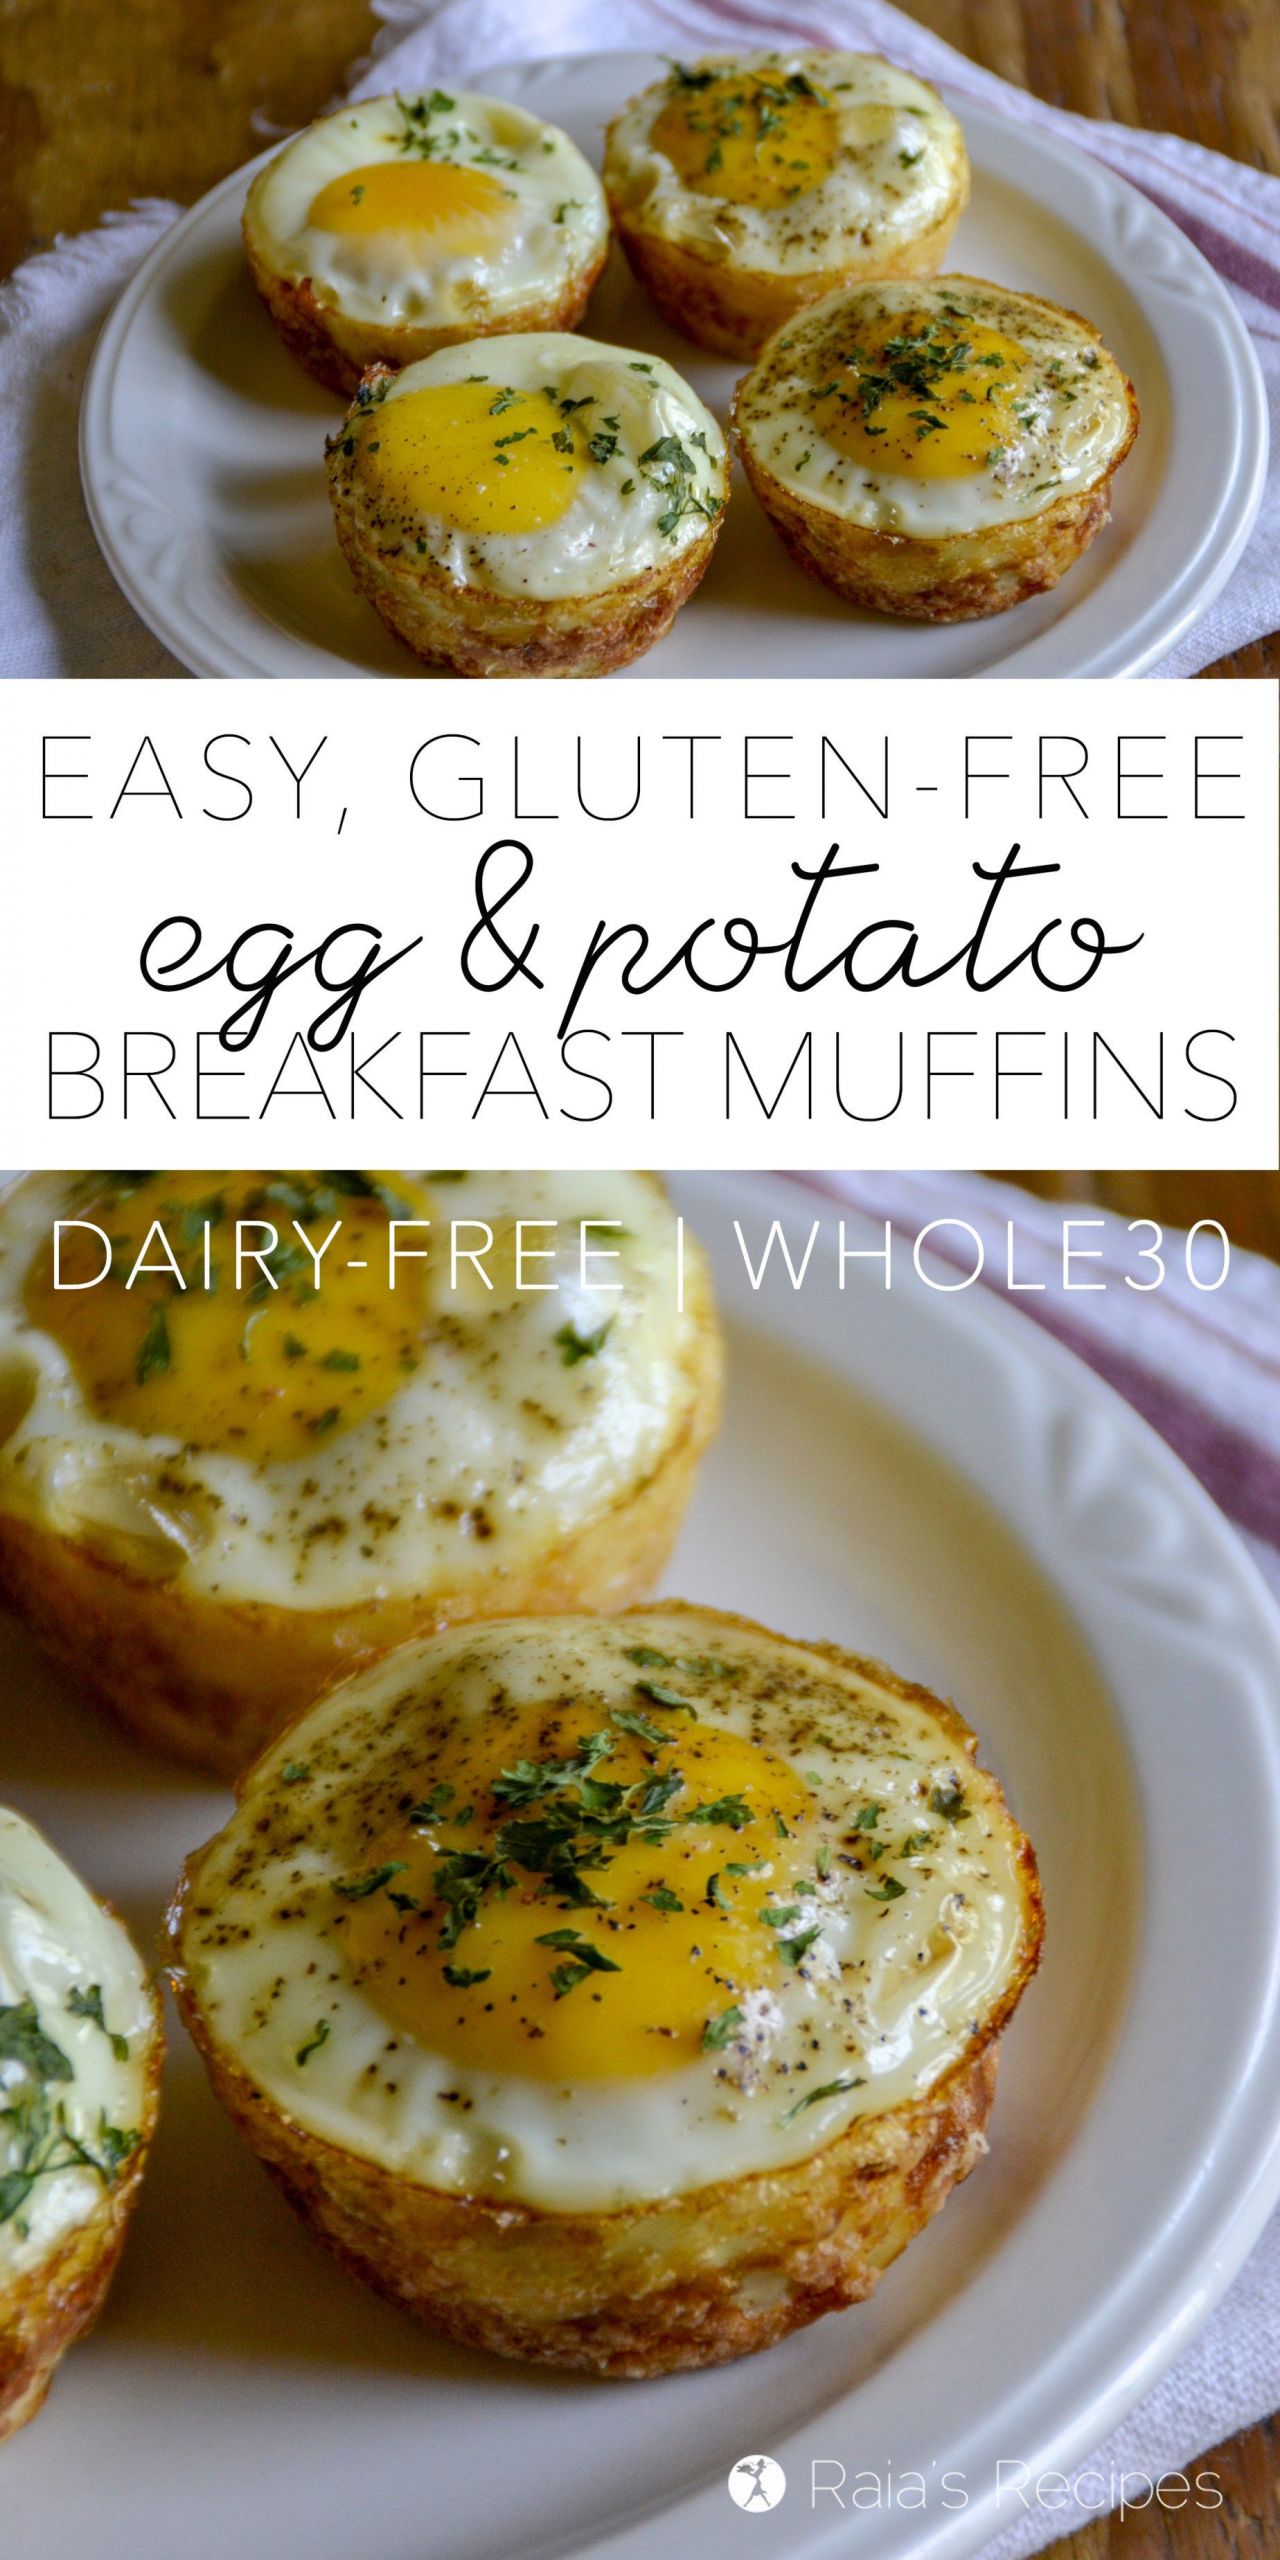 Dairy And Egg Free Breakfast Recipes
 Easy Gluten Free Egg & Potato Breakfast Muffins Dairy